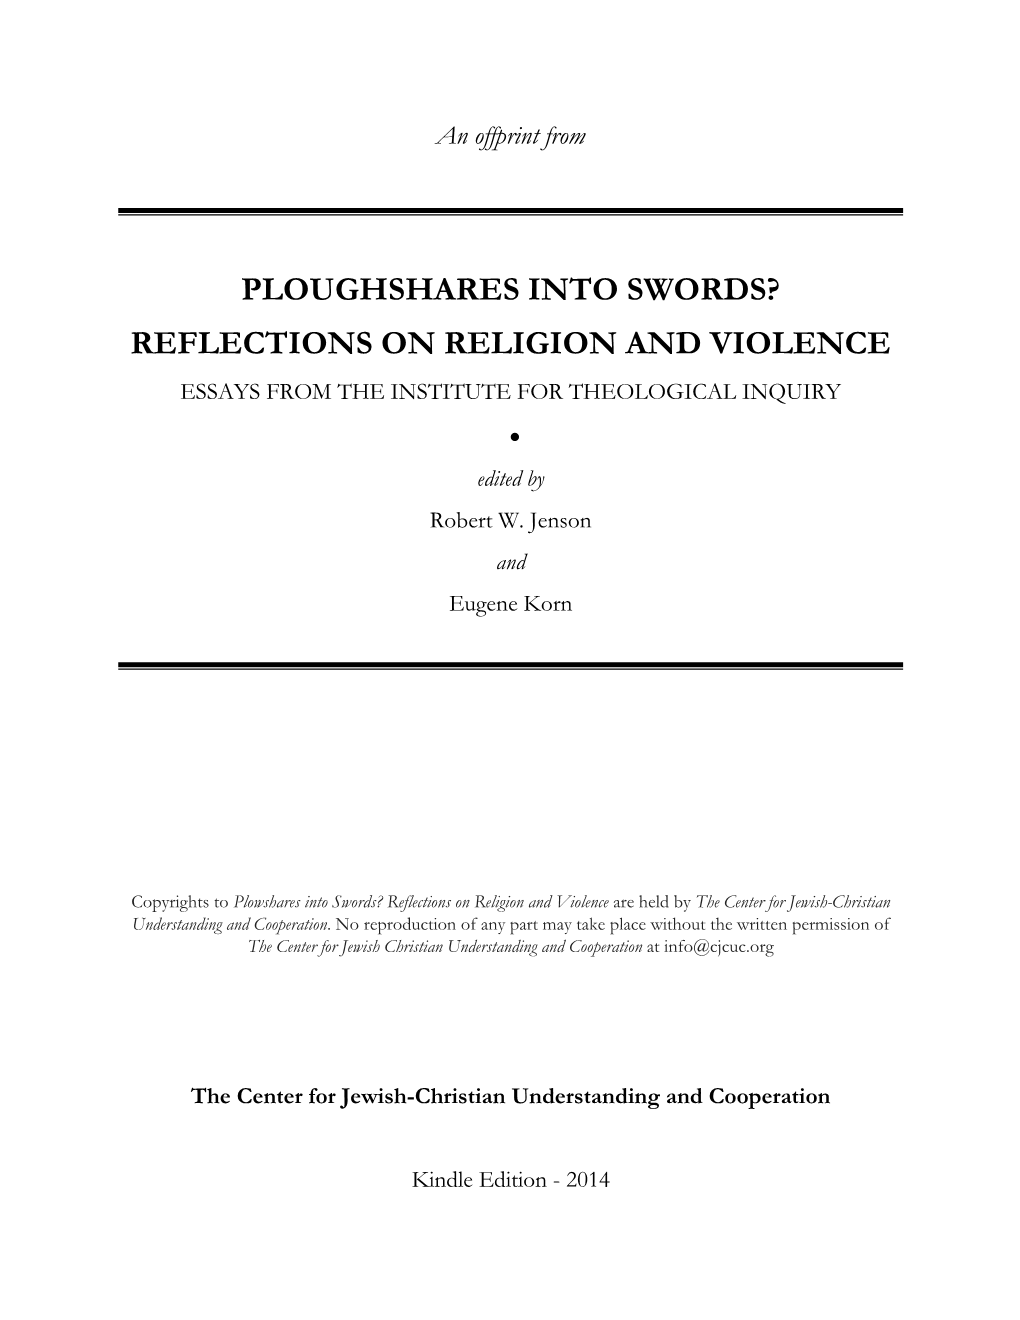 REFLECTIONS on RELIGION and VIOLENCE ESSAYS from the INSTITUTE for THEOLOGICAL INQUIRY  Edited by Robert W